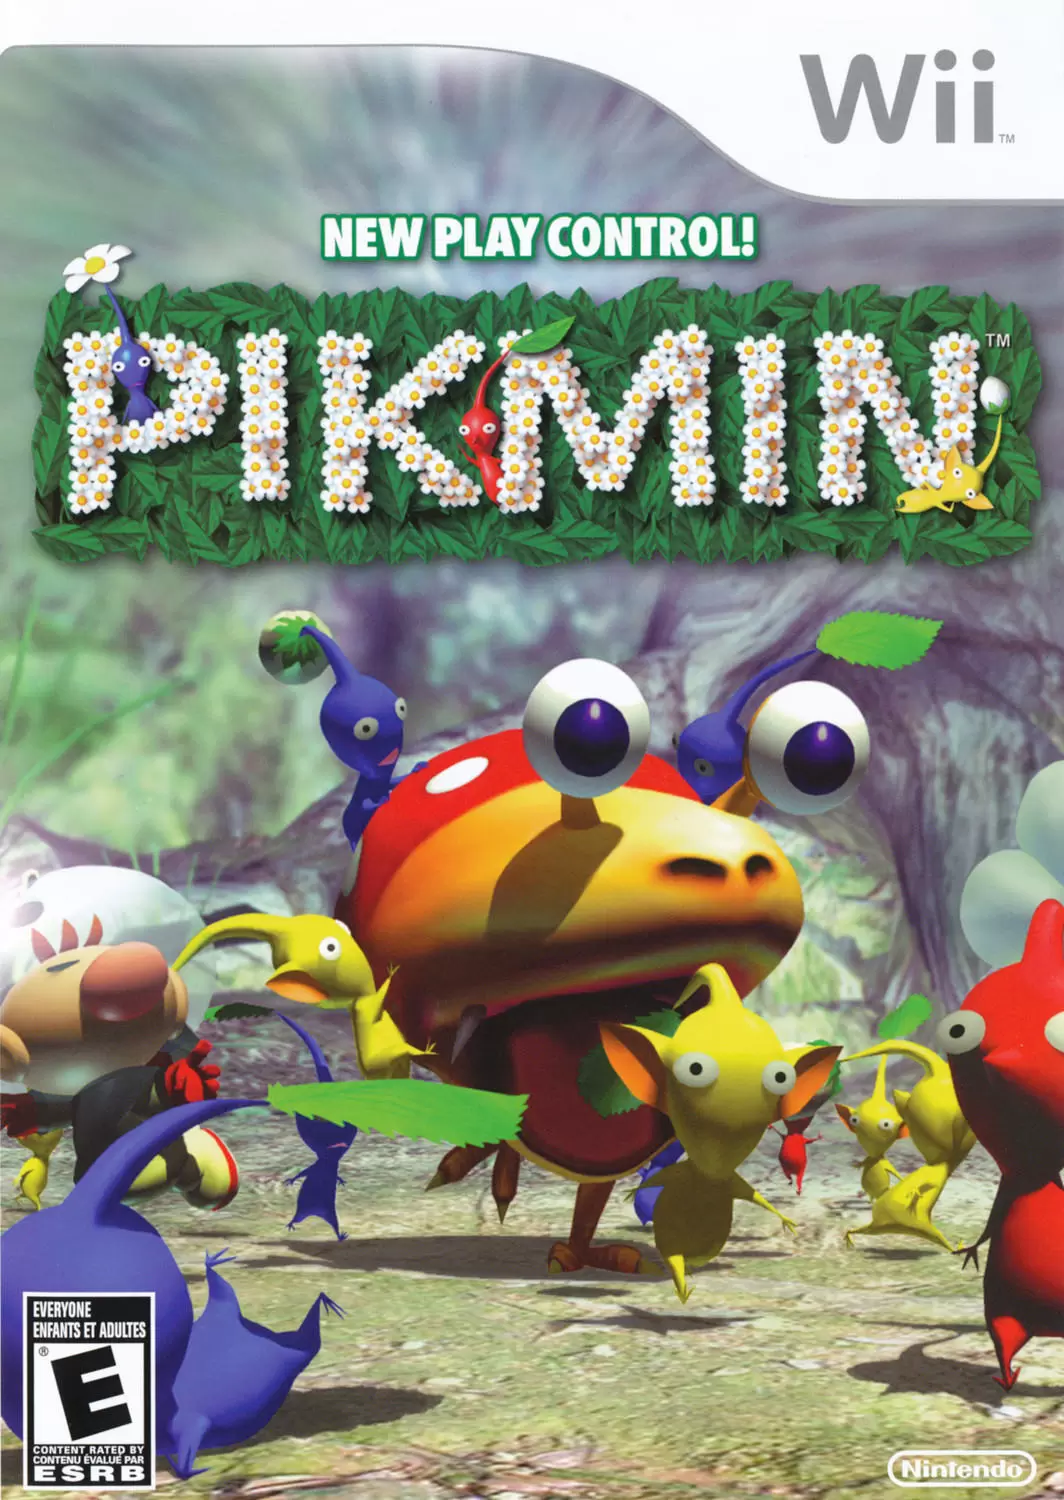 Nintendo Wii Games - New Play Control!: Pikmin